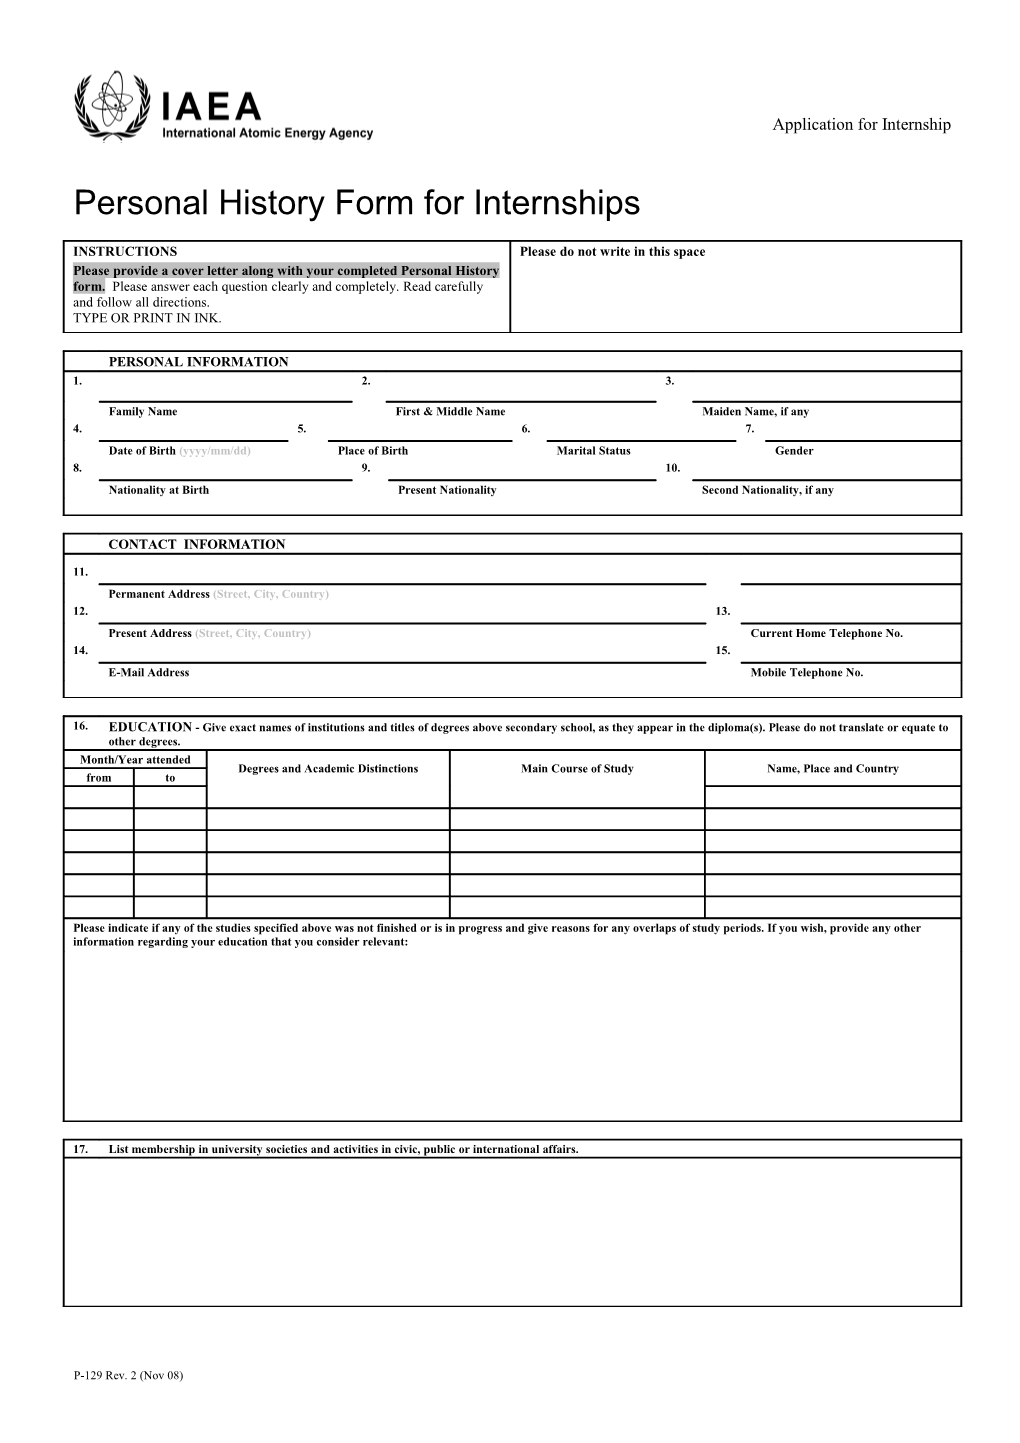 IAEA Personal History Form for Interns